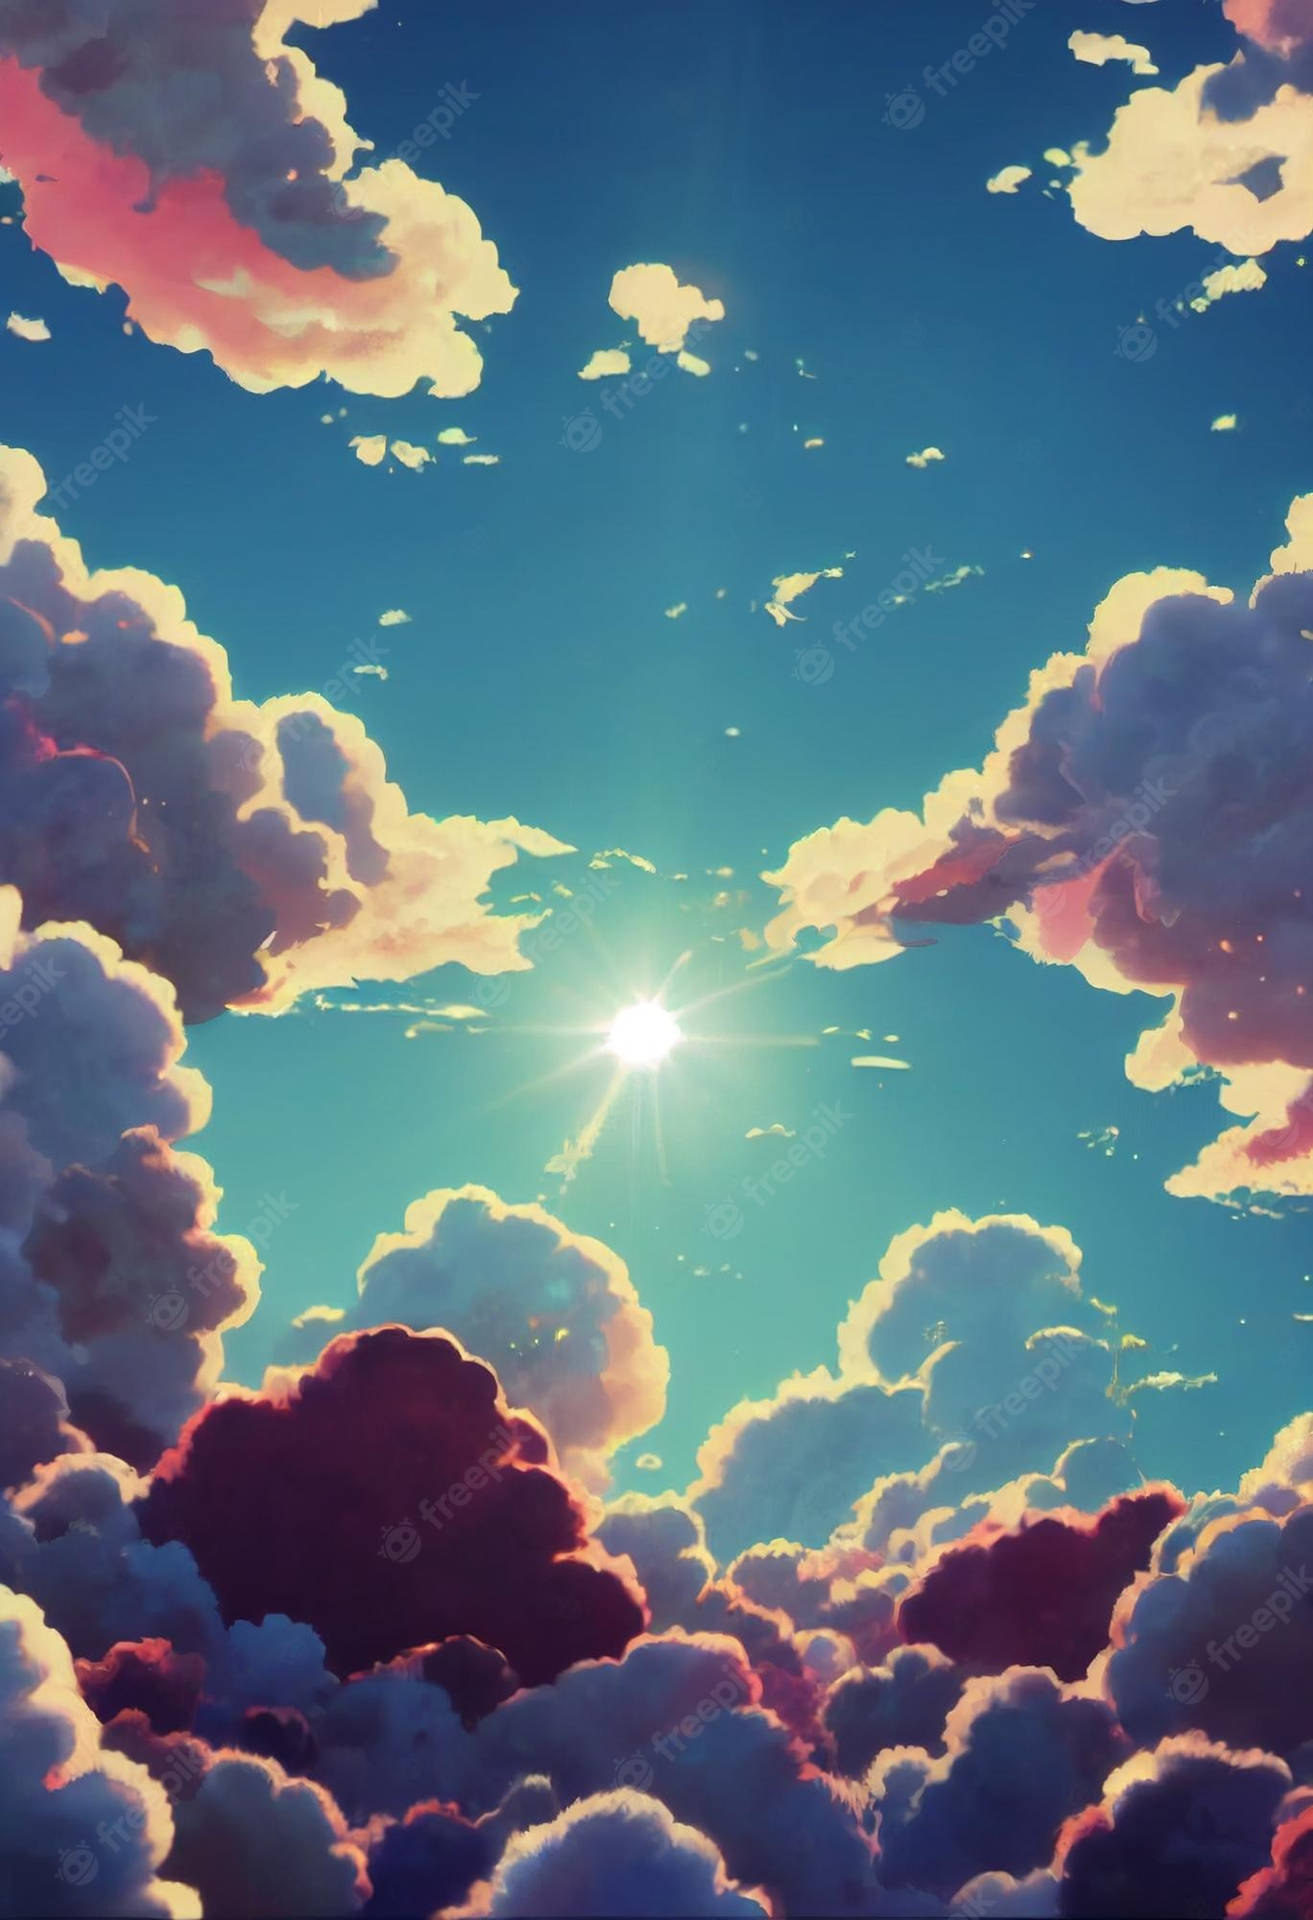 Clouds In The Sky With Sun Wallpaper